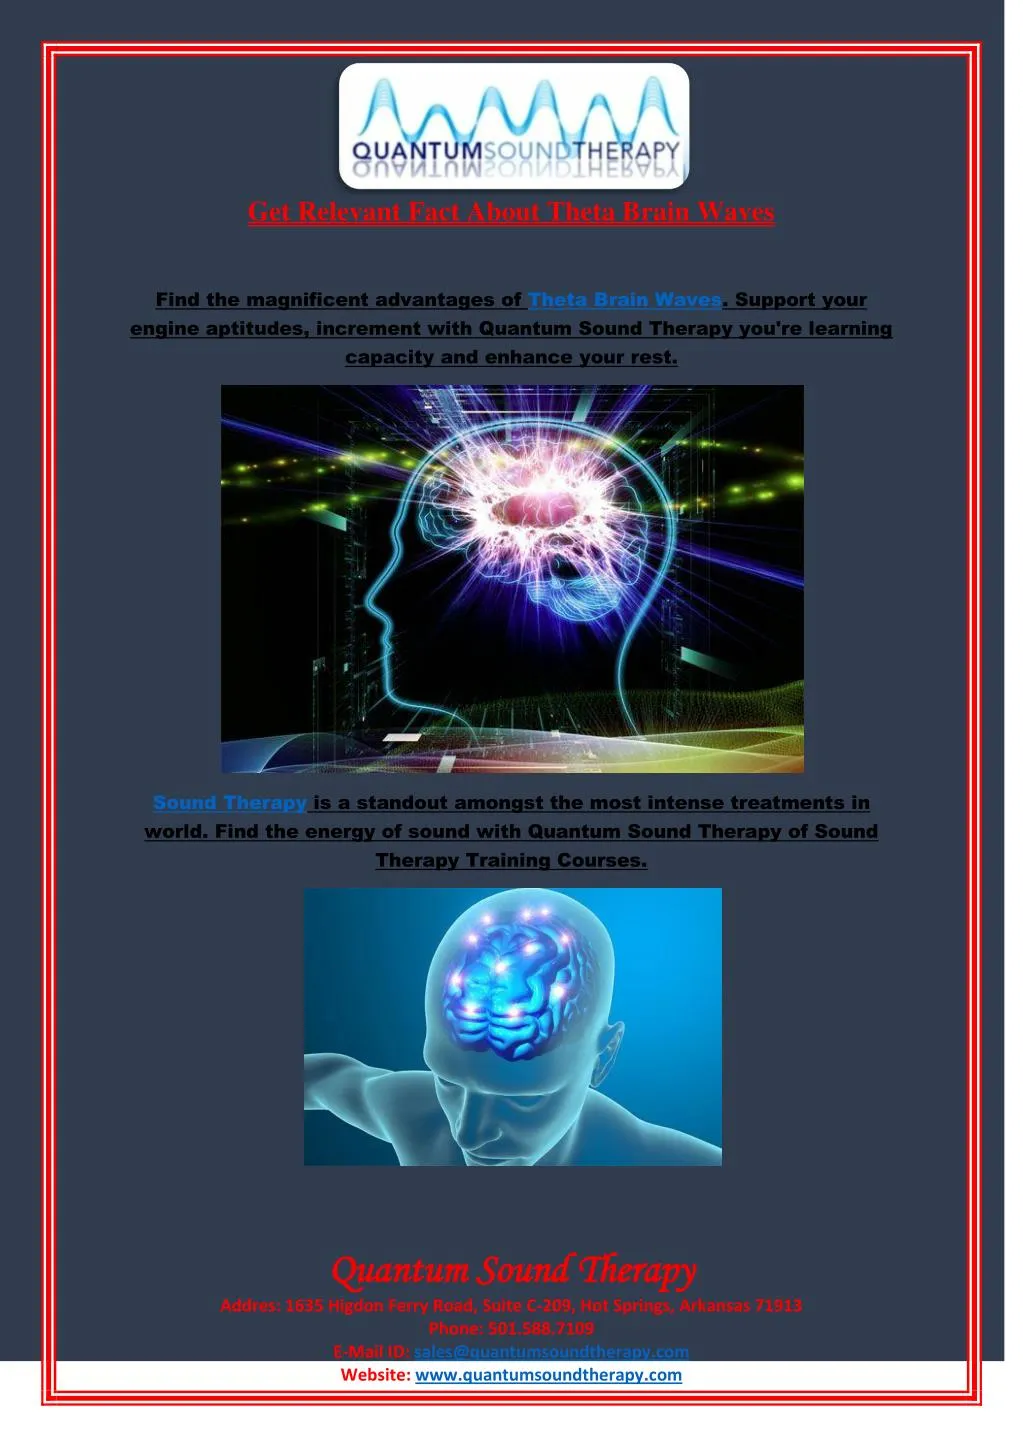 get relevant fact about theta brain waves